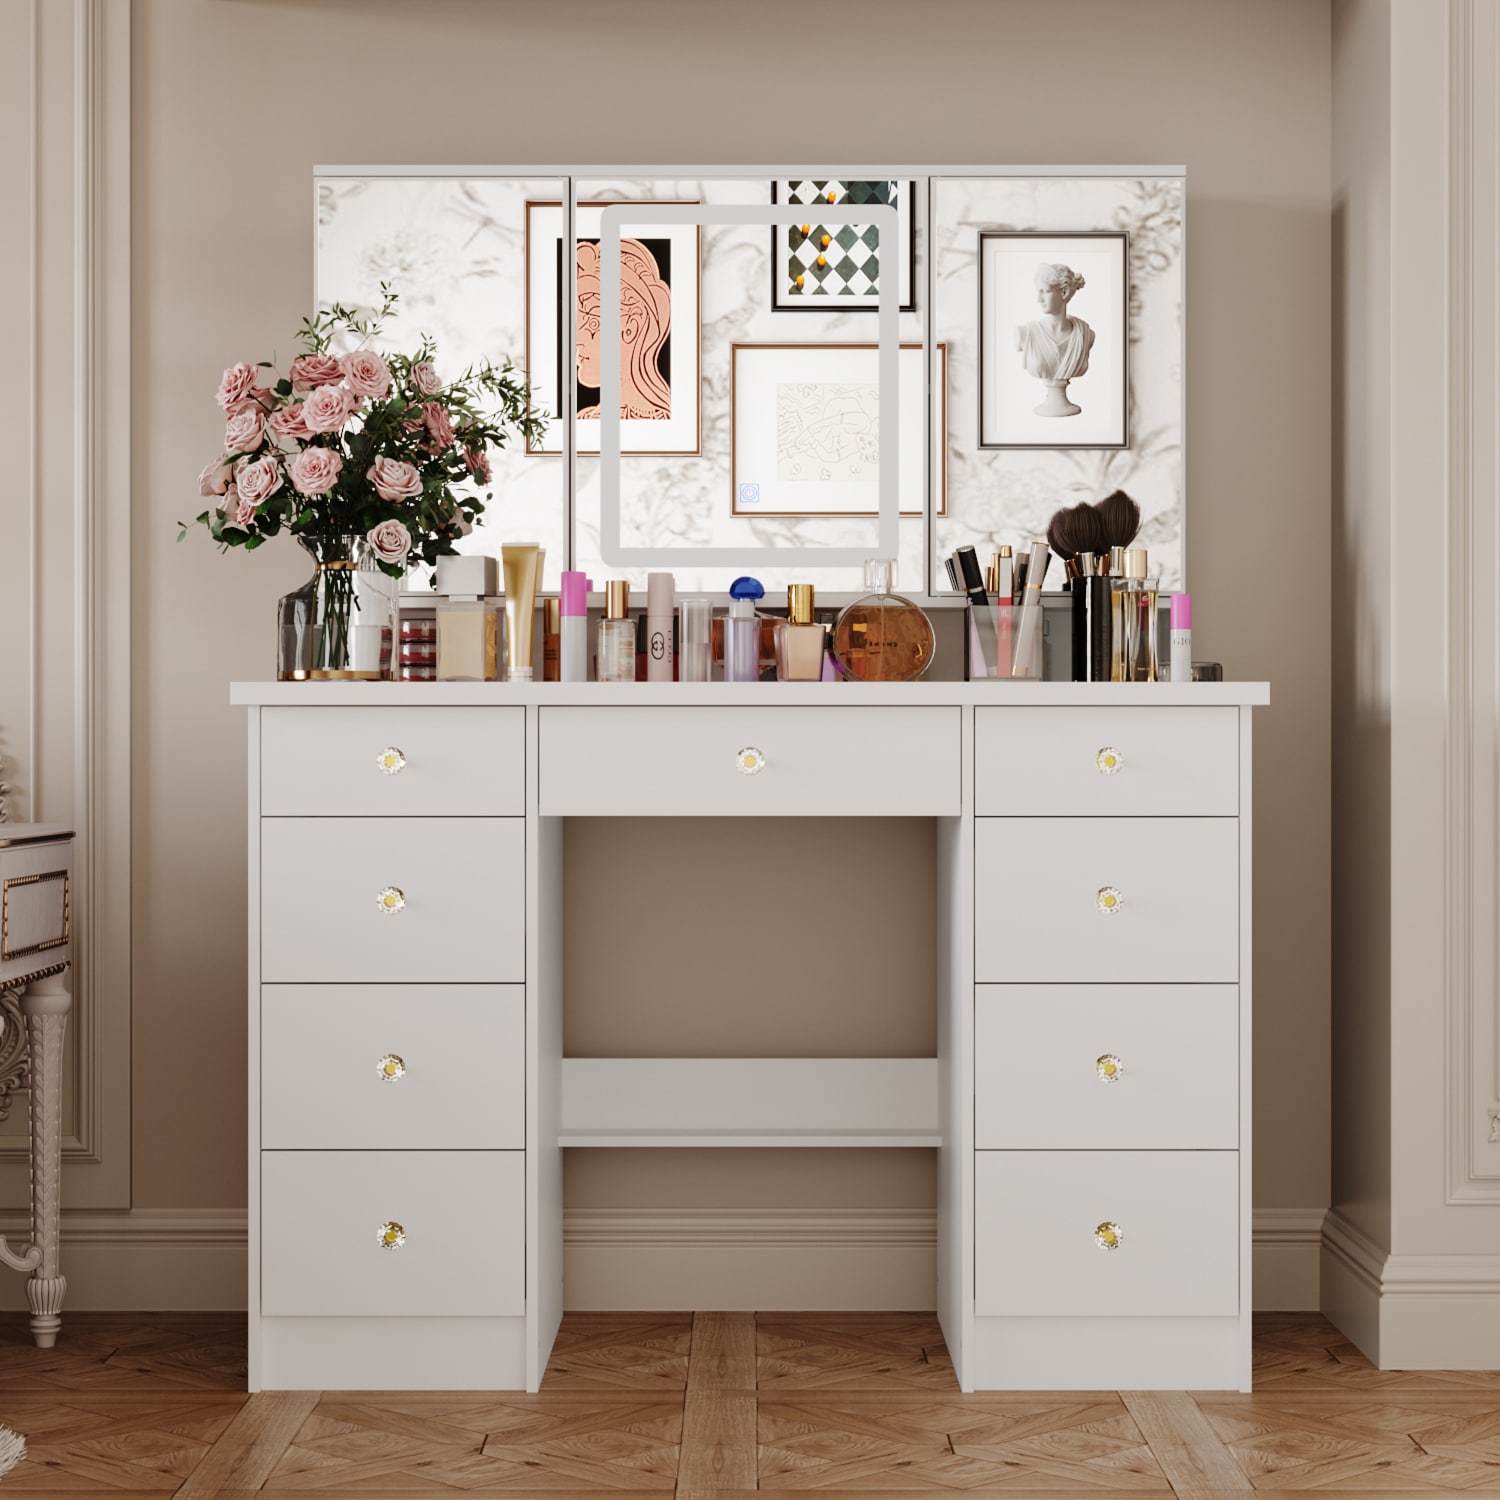 These 17 Bathroom Vanities with a Makeup Table Make Getting Ready Feel Fun